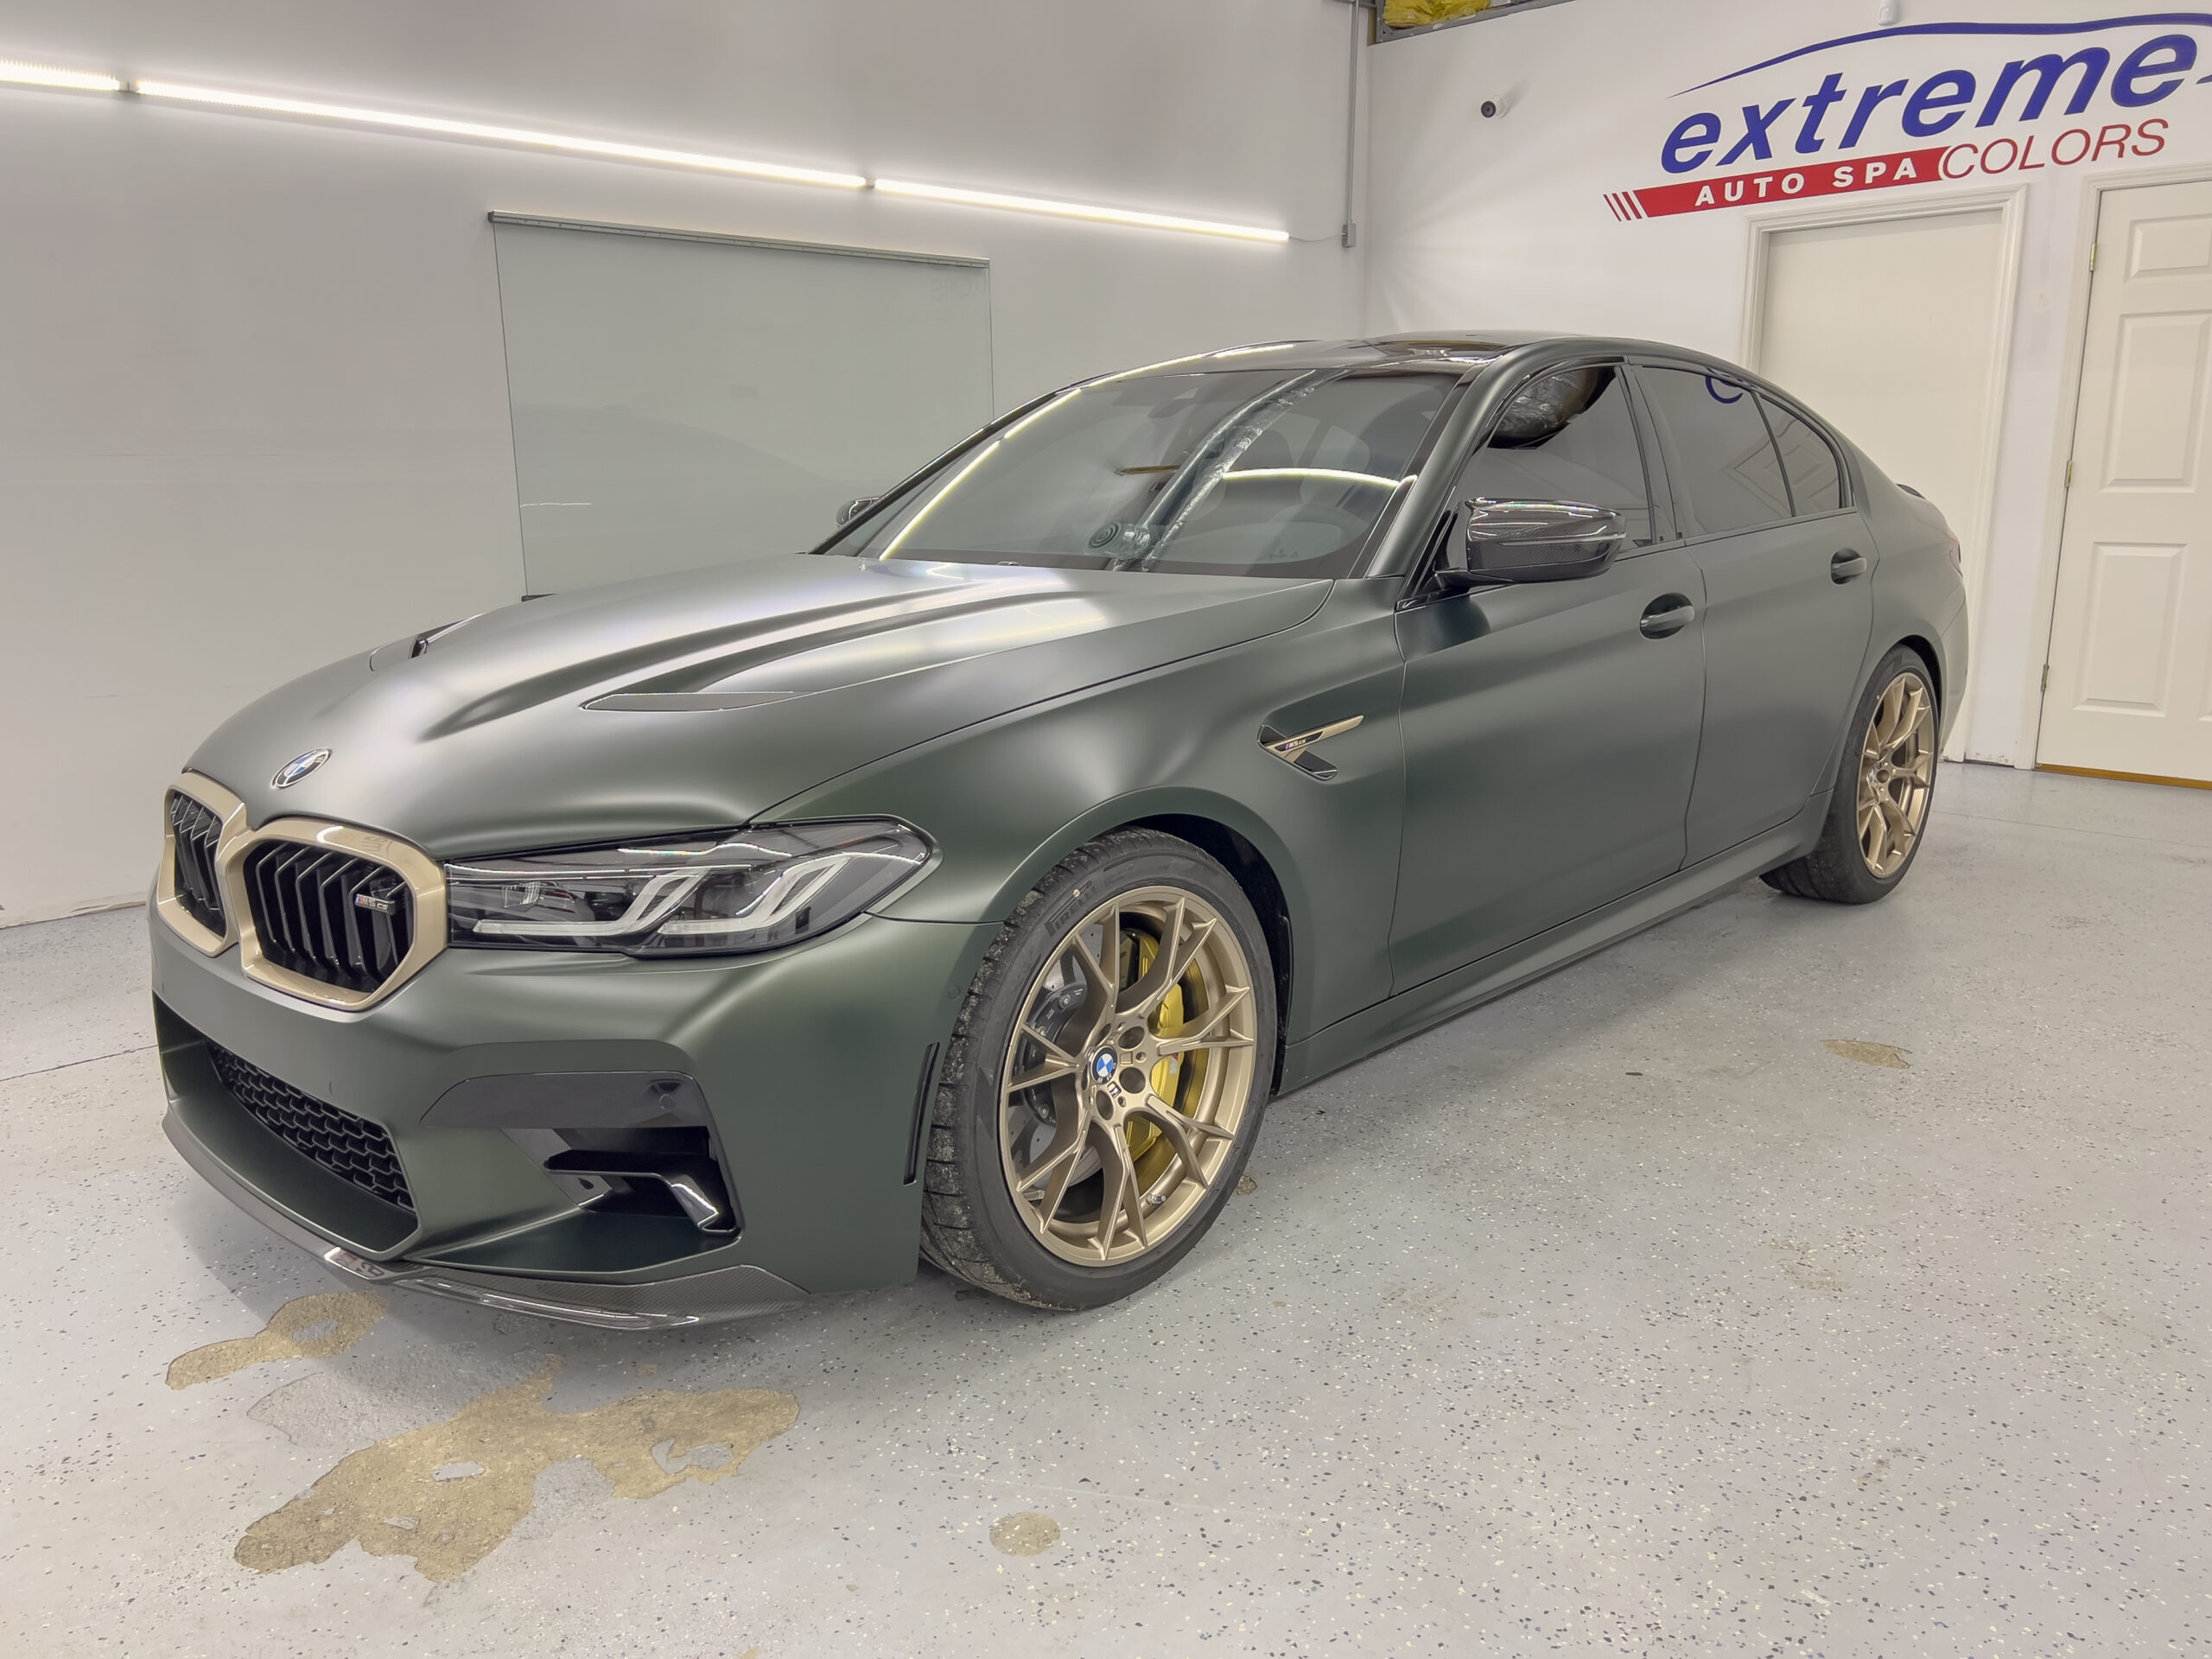 Feature Friday: BMW M5 CS